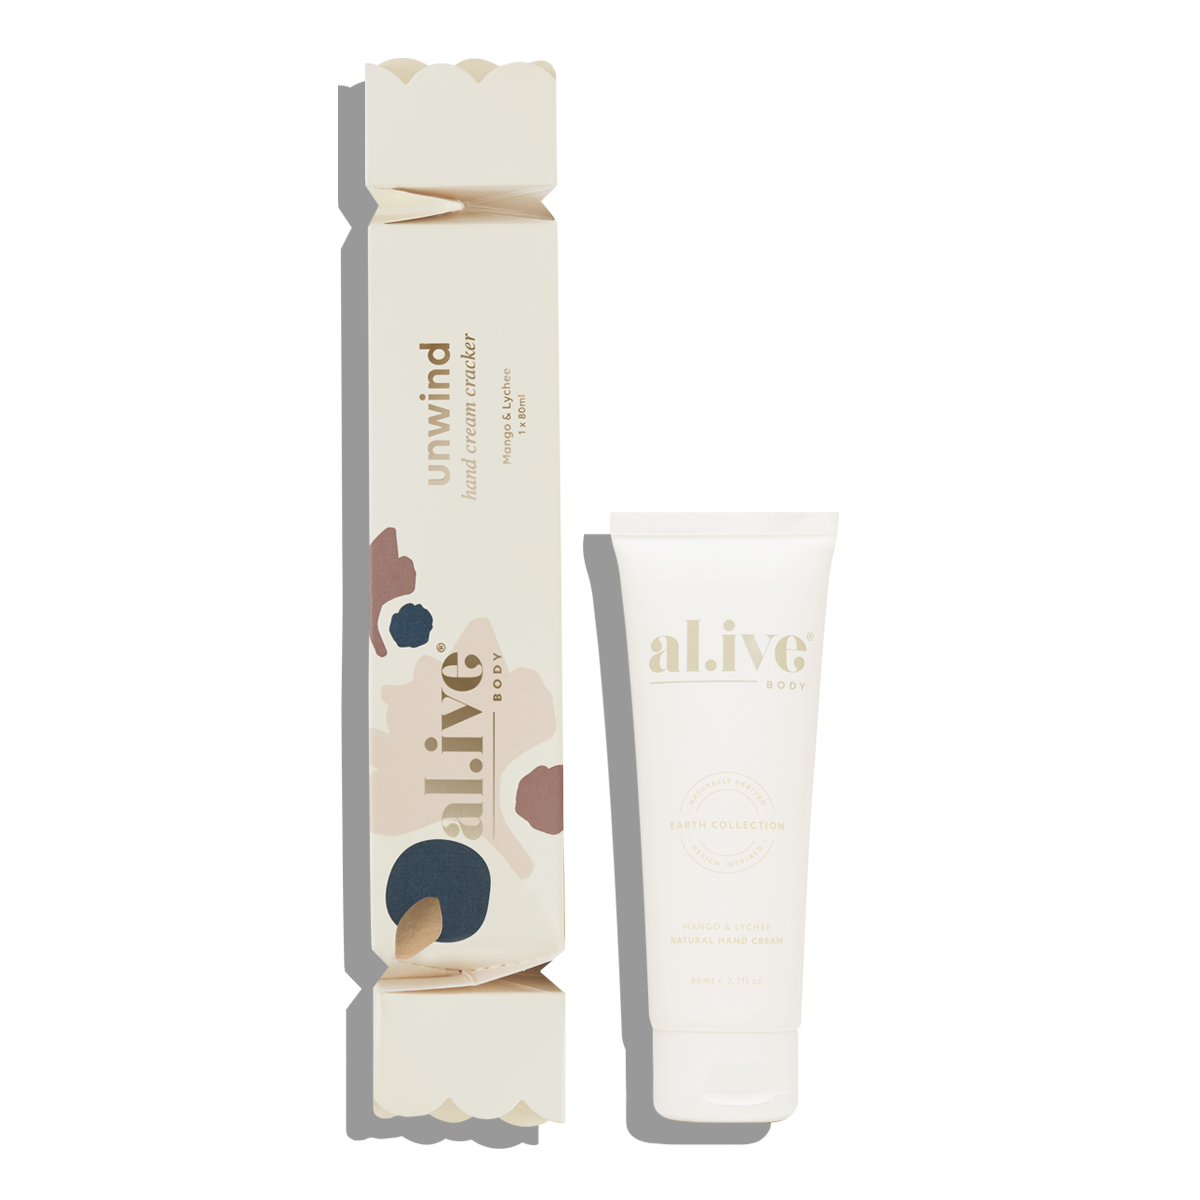 Indulge your senses and nourish your hardworking hands with the Unwind Hand Cream Cracker. This exquisite Christmas cracker-shaped package contains our luxurious Mango & Lychee Hand Cream, made with nourishing ingredients like Cocoa Butter, Shea Butter, and Sweet Almond Oil.